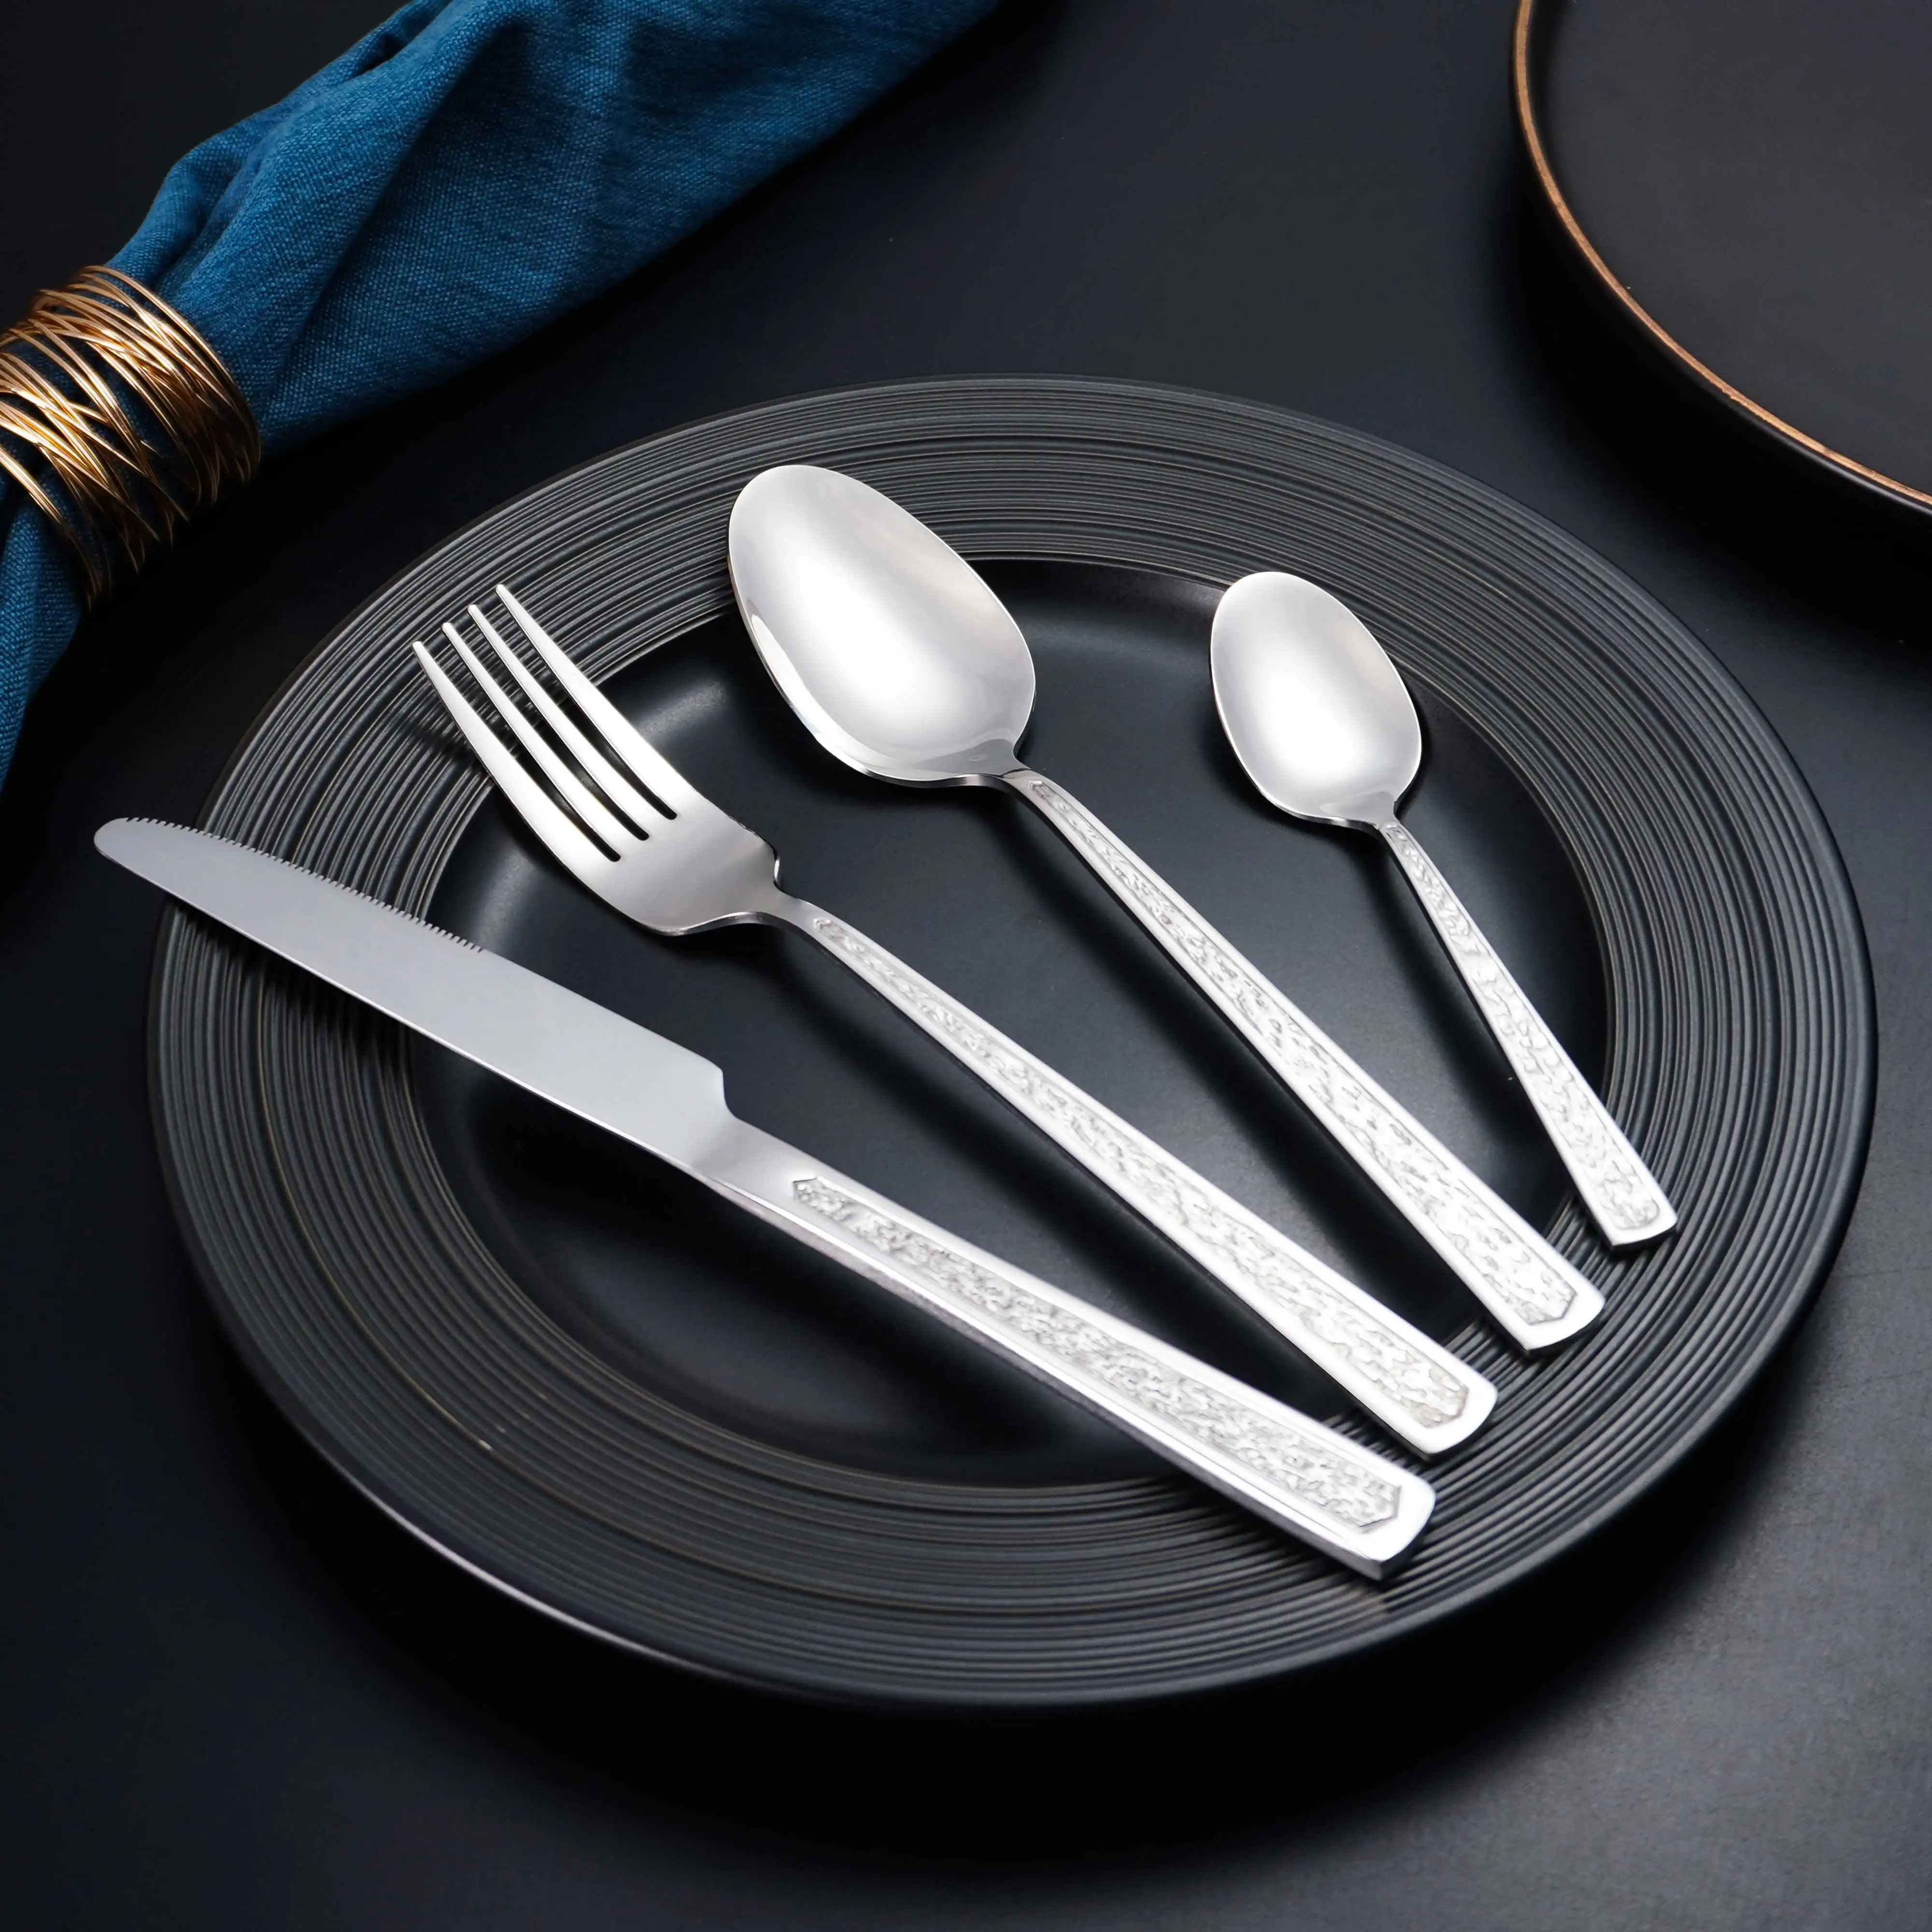 Restaurant Wholesale Silverware Stainless Steel Spoons Forks Knives Flatware Cutlery Set For Party